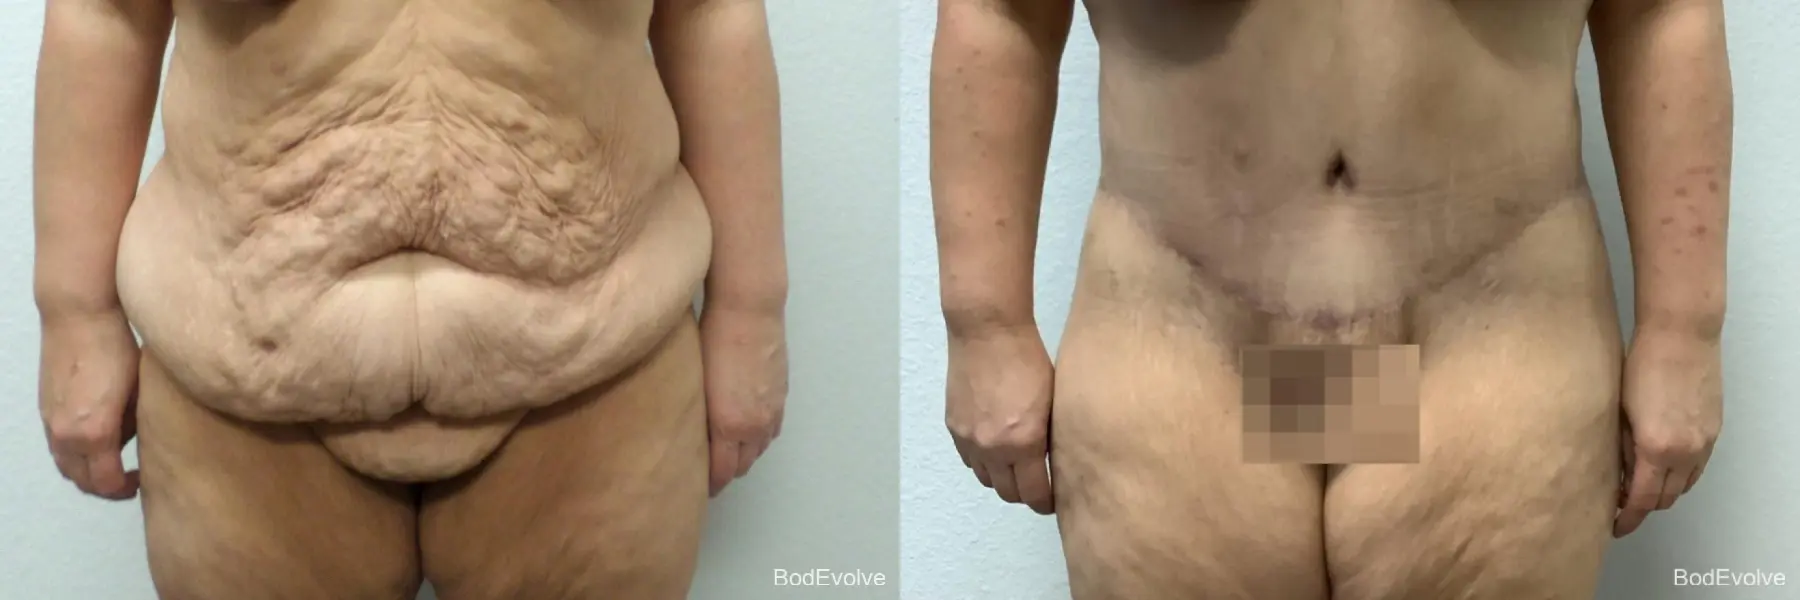 Body Lift: Patient 3 - Before and After 1